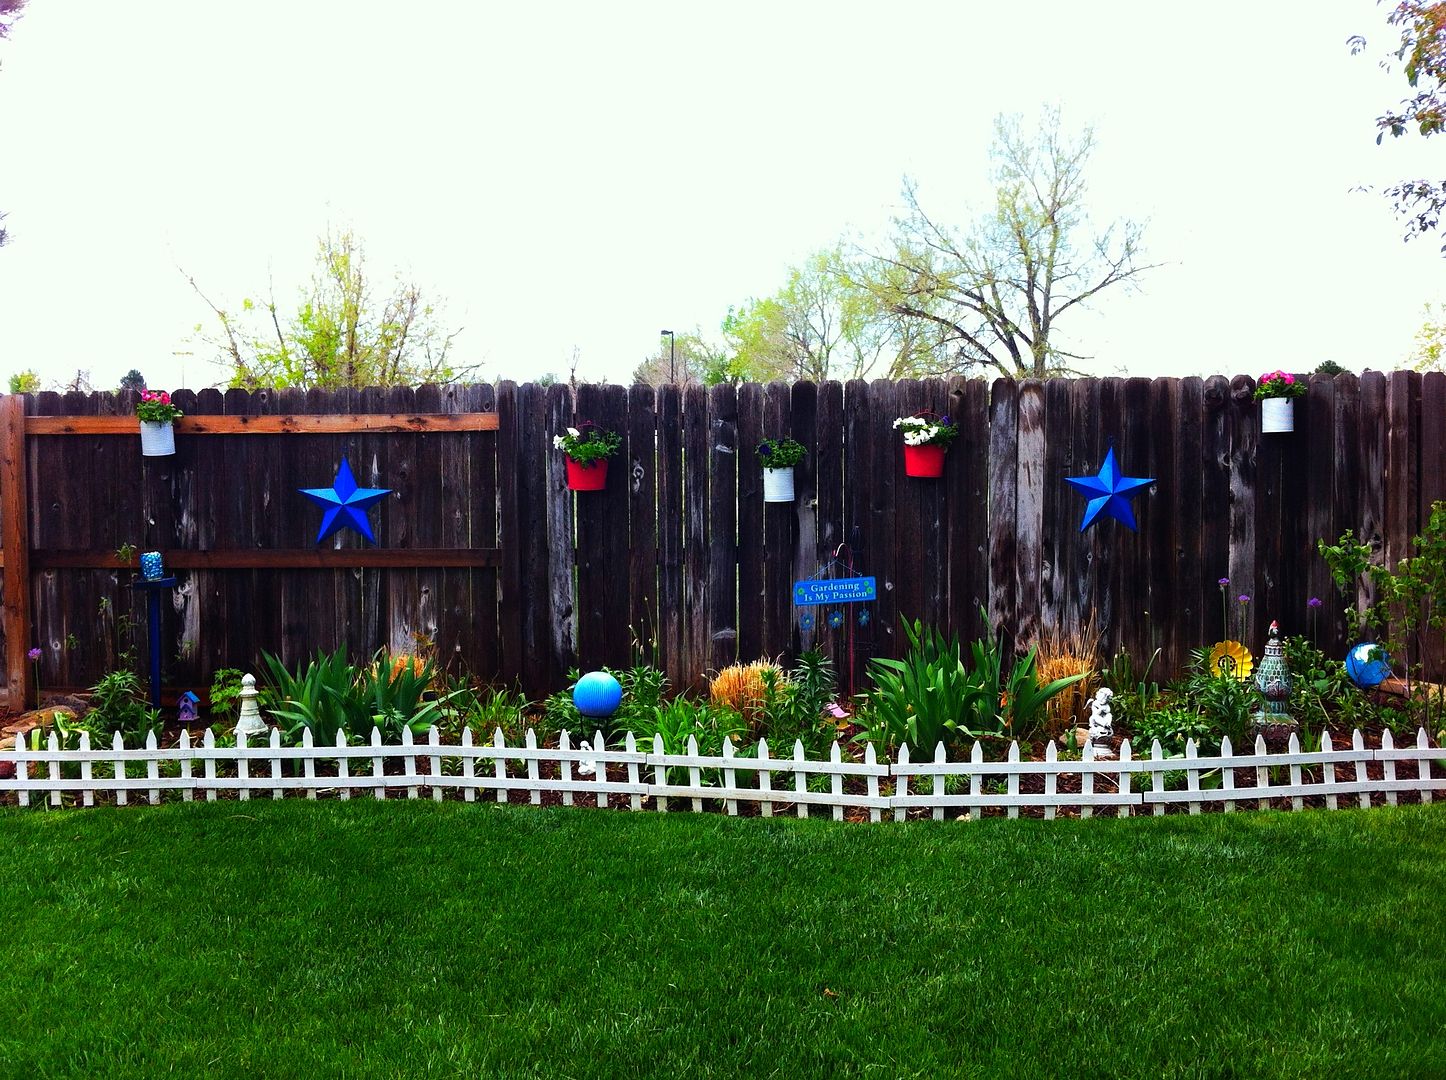 Kathe With An E Wooden Fence Project